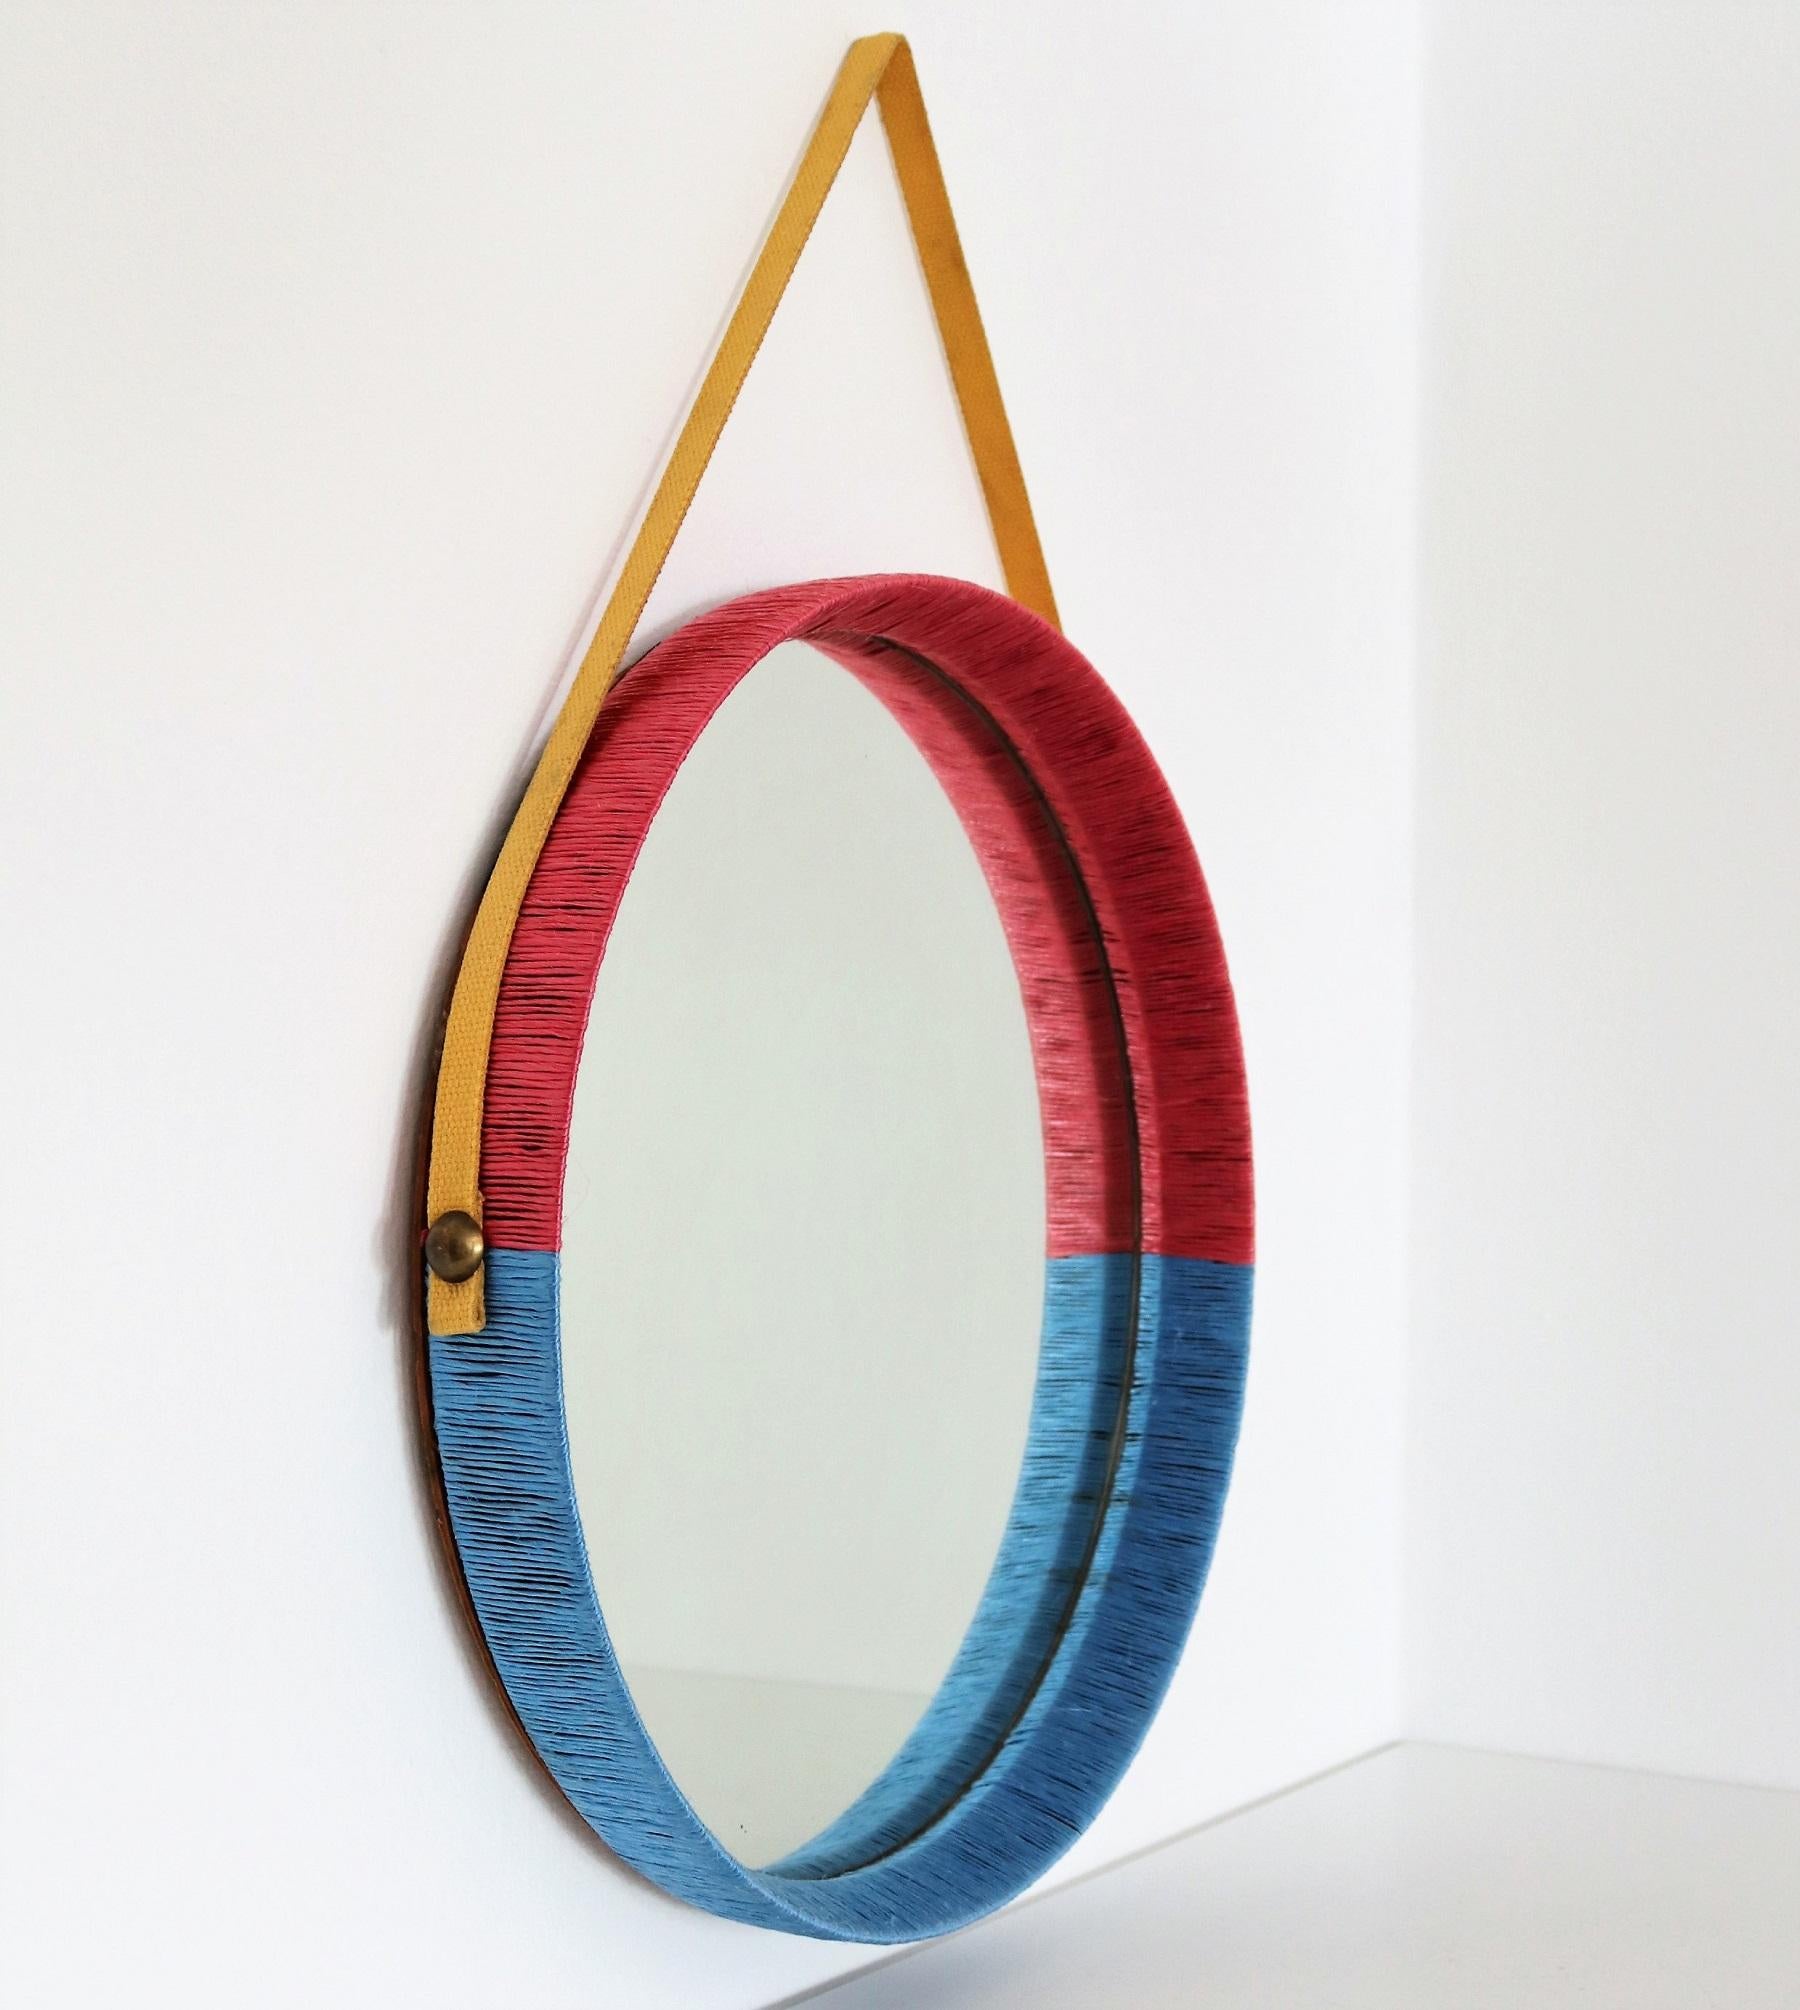 Beautiful und unique Italian mid-century wall mirror with yellow hanging ribbon.
Made in Italy in the 1950s.
The mirror is most probably inside made of chestnut and have been covered by an artisan with a red and blue cord and hung on a wall hook